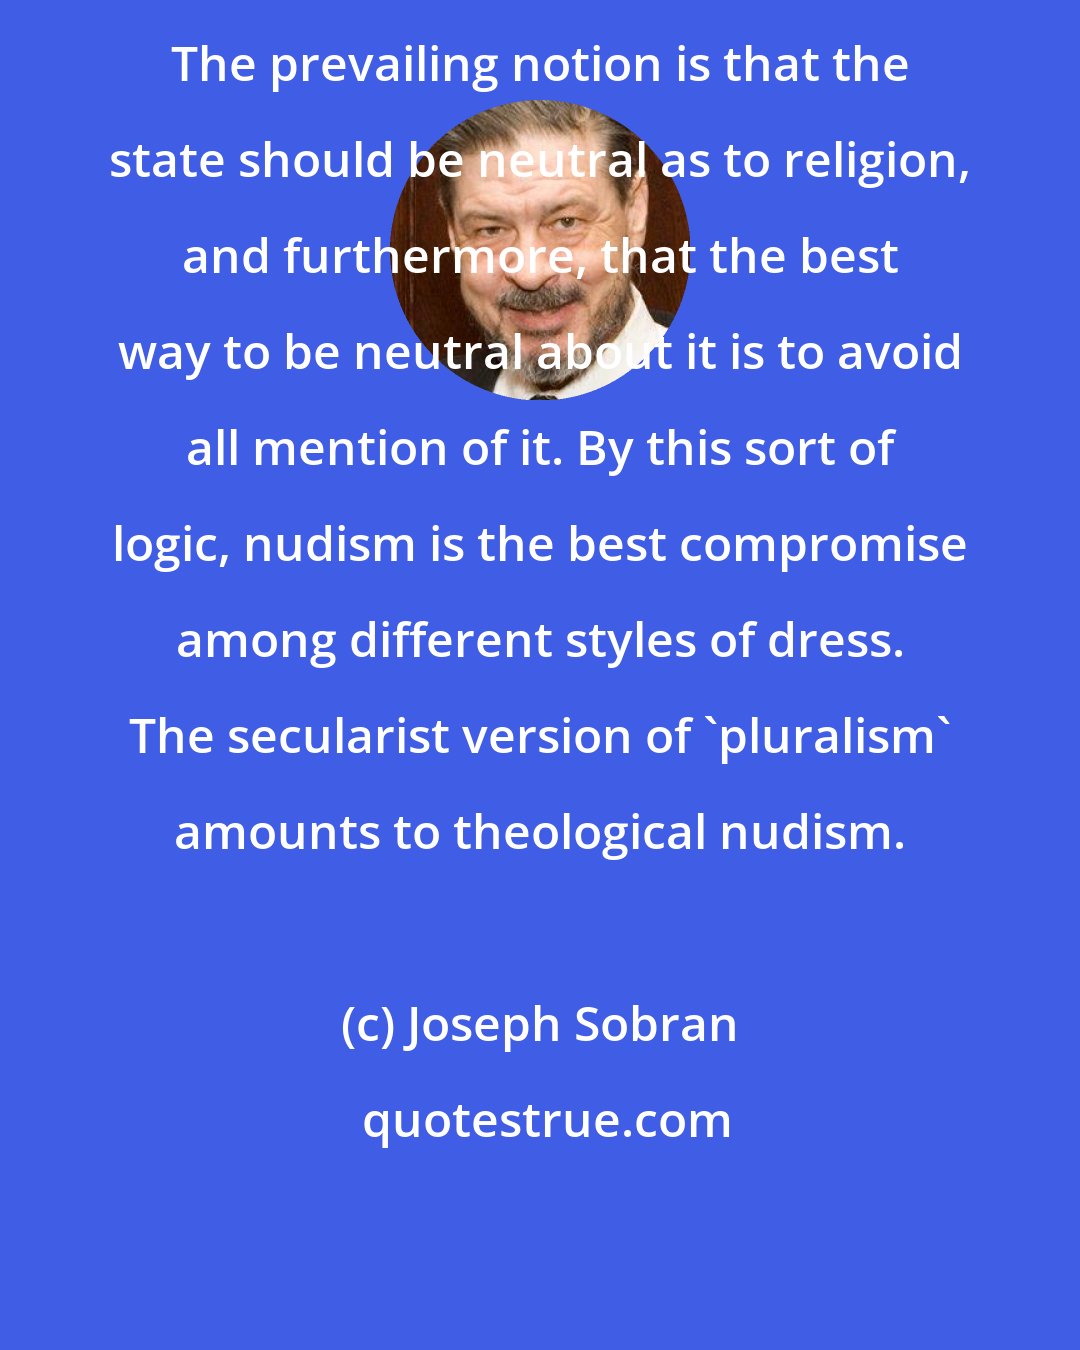 Joseph Sobran: The prevailing notion is that the state should be neutral as to religion, and furthermore, that the best way to be neutral about it is to avoid all mention of it. By this sort of logic, nudism is the best compromise among different styles of dress. The secularist version of 'pluralism' amounts to theological nudism.